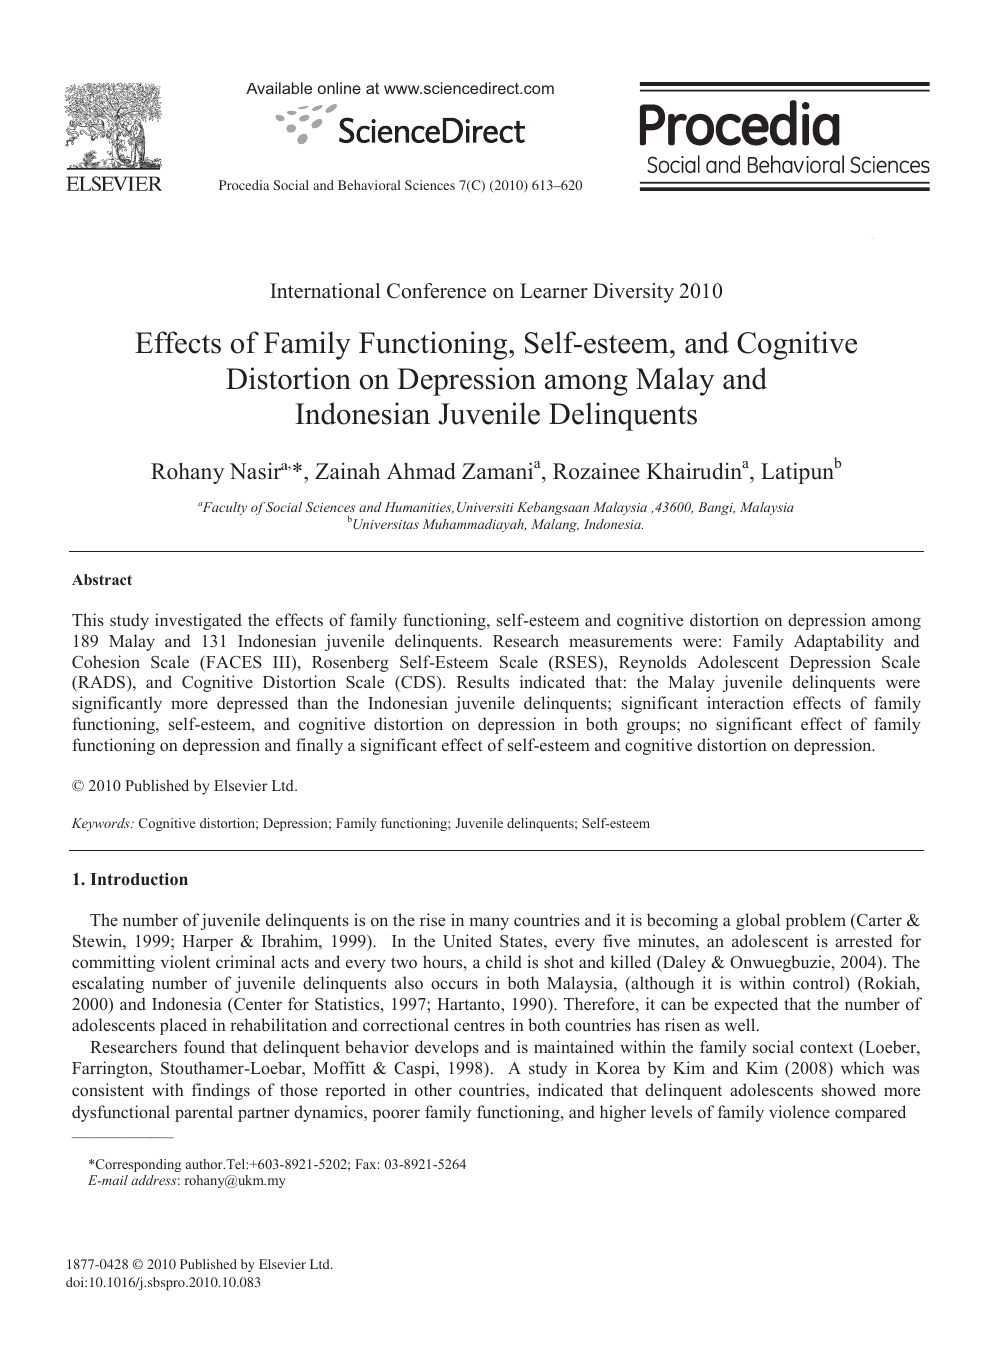 Effects Of Family Functioning Self Esteem And Cognitive Distortion On Depression Among Malay And Indonesian Juvenile Delinquents Topic Of Research Paper In Psychology Download Scholarly Article Pdf And Read For Free On